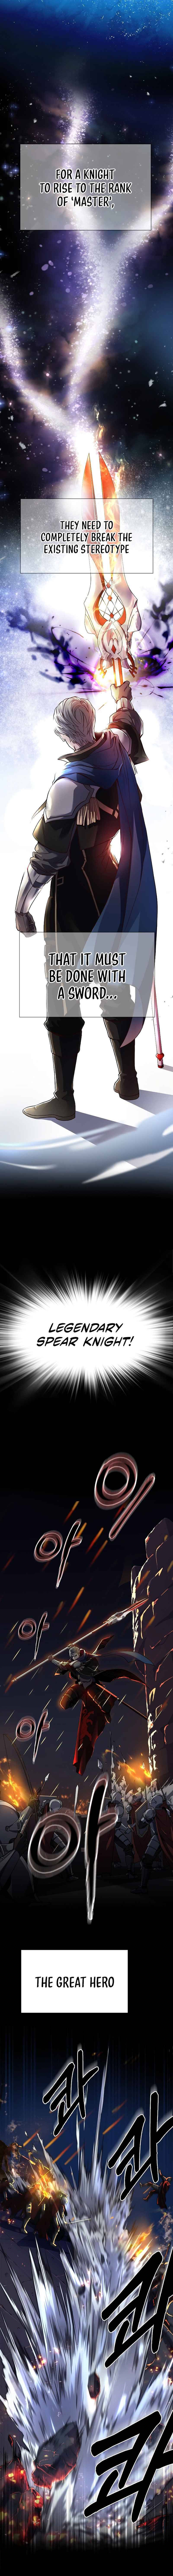 Return of the Legendary Spear Knight Chapter 1 - Page 1